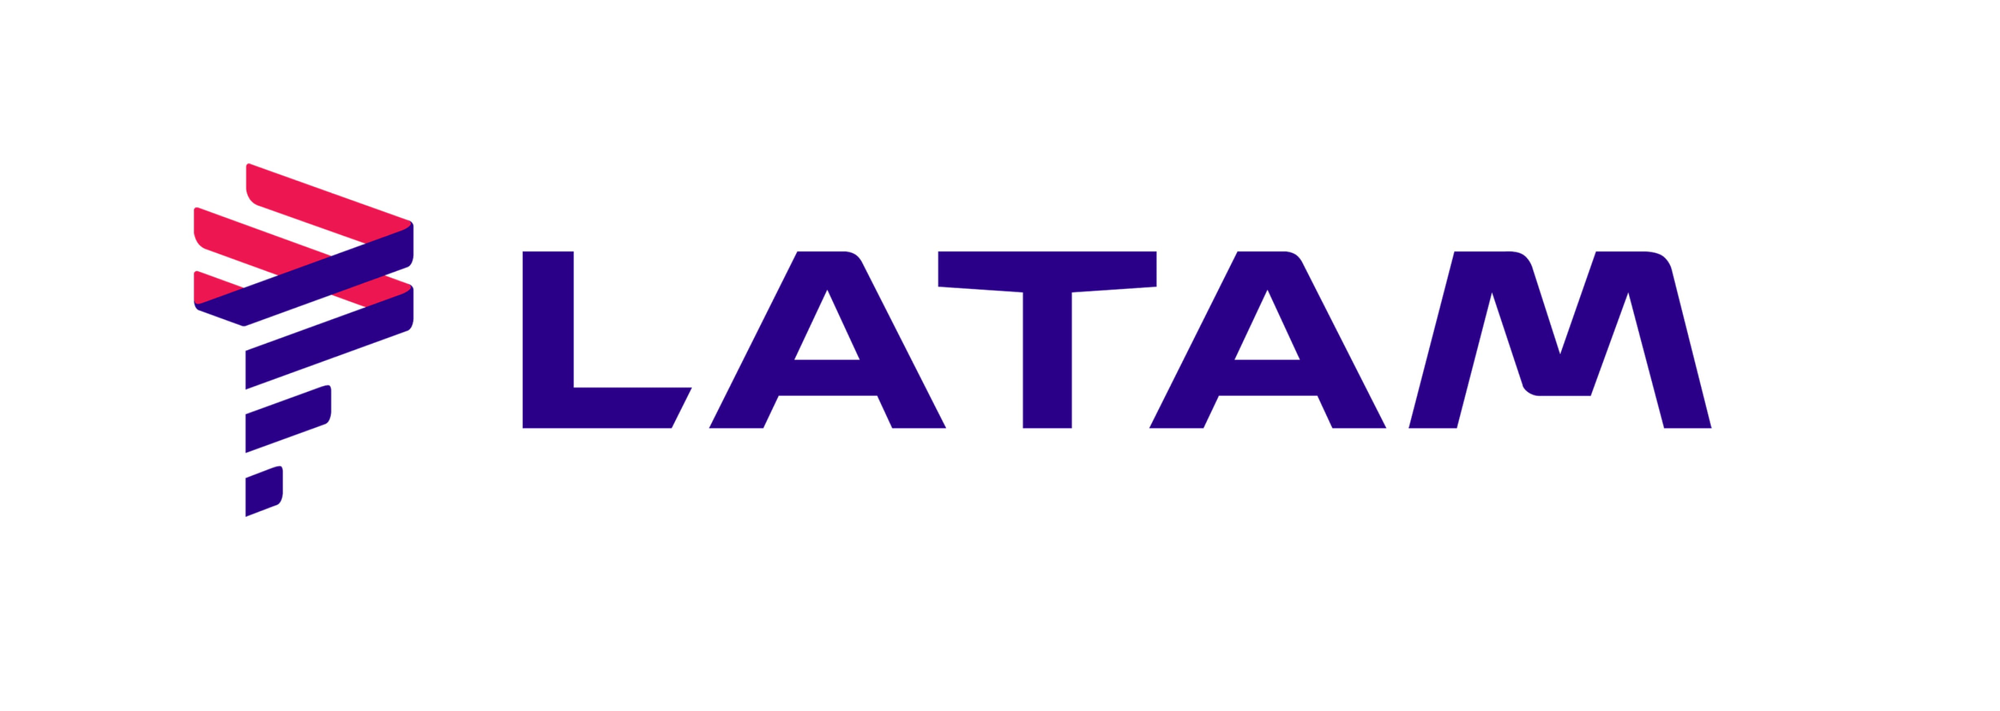 FTAI Aviation Ltd. and LATAM Airlines Group S.A. Engineer Perpetual Power Program